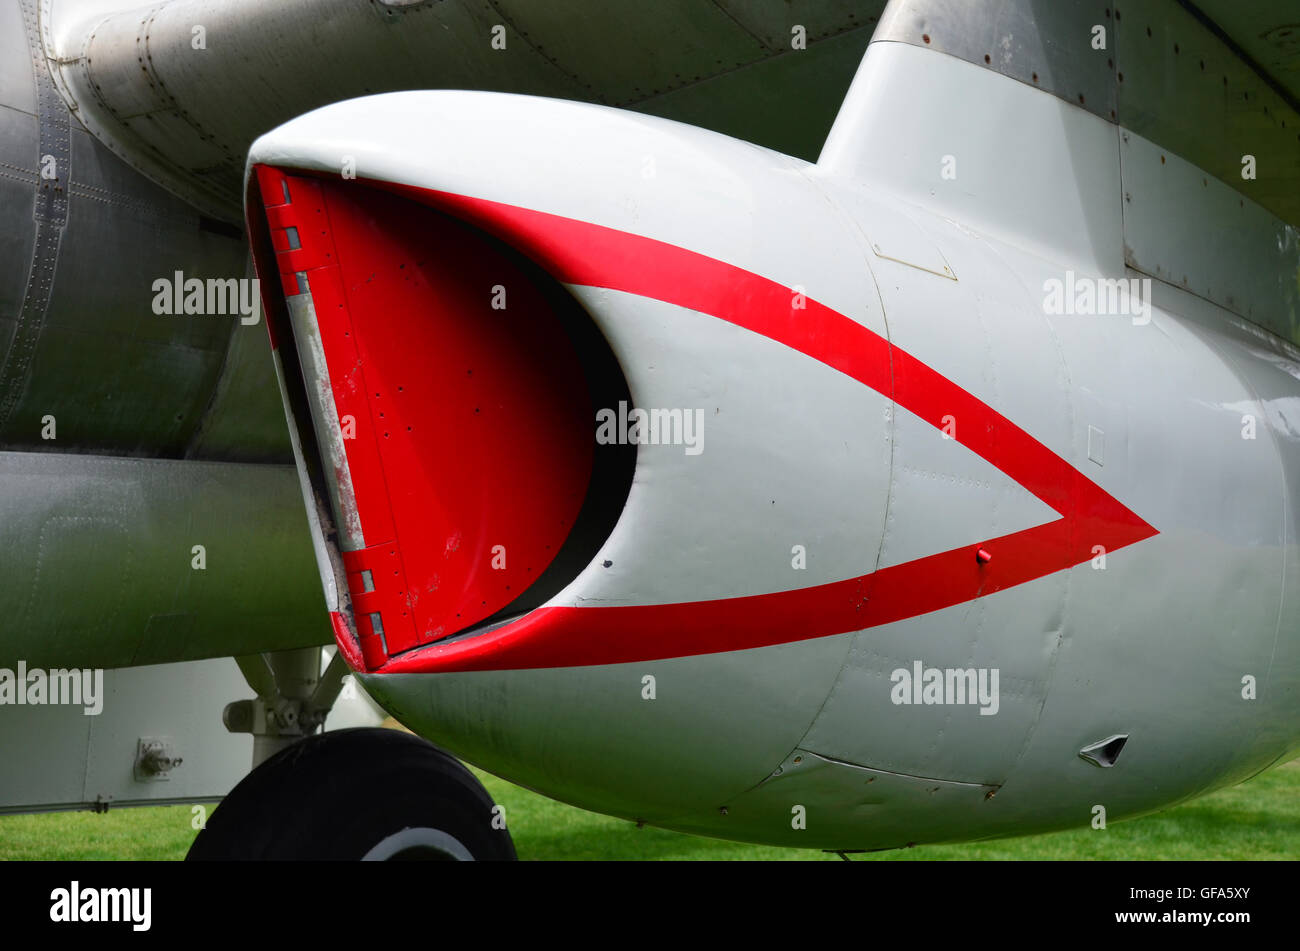 Detail of intake and fuselage of vintage aircraft Stock Photo